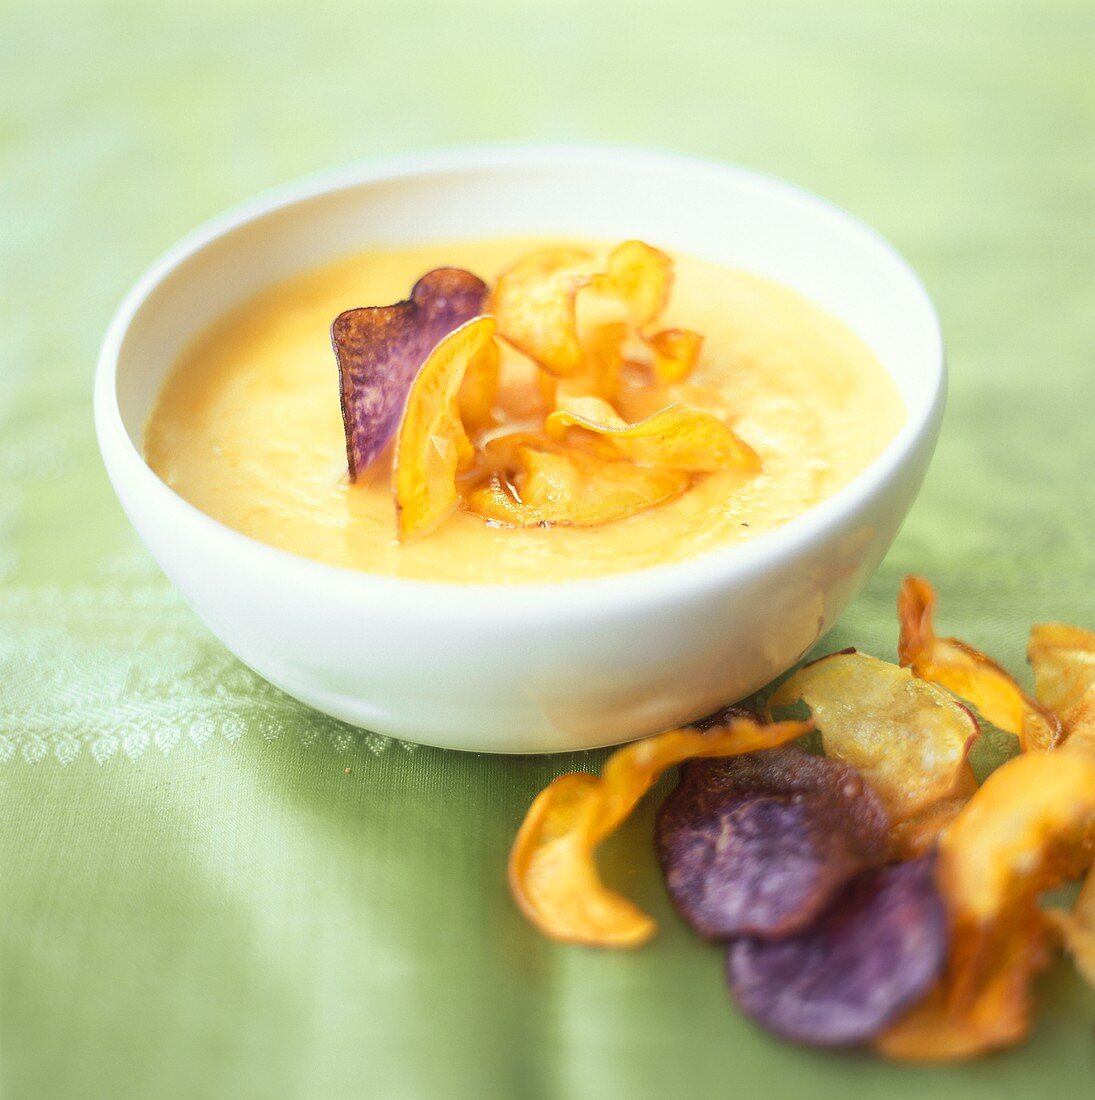 Potato and pumpkin soup with fried vegetable crisps